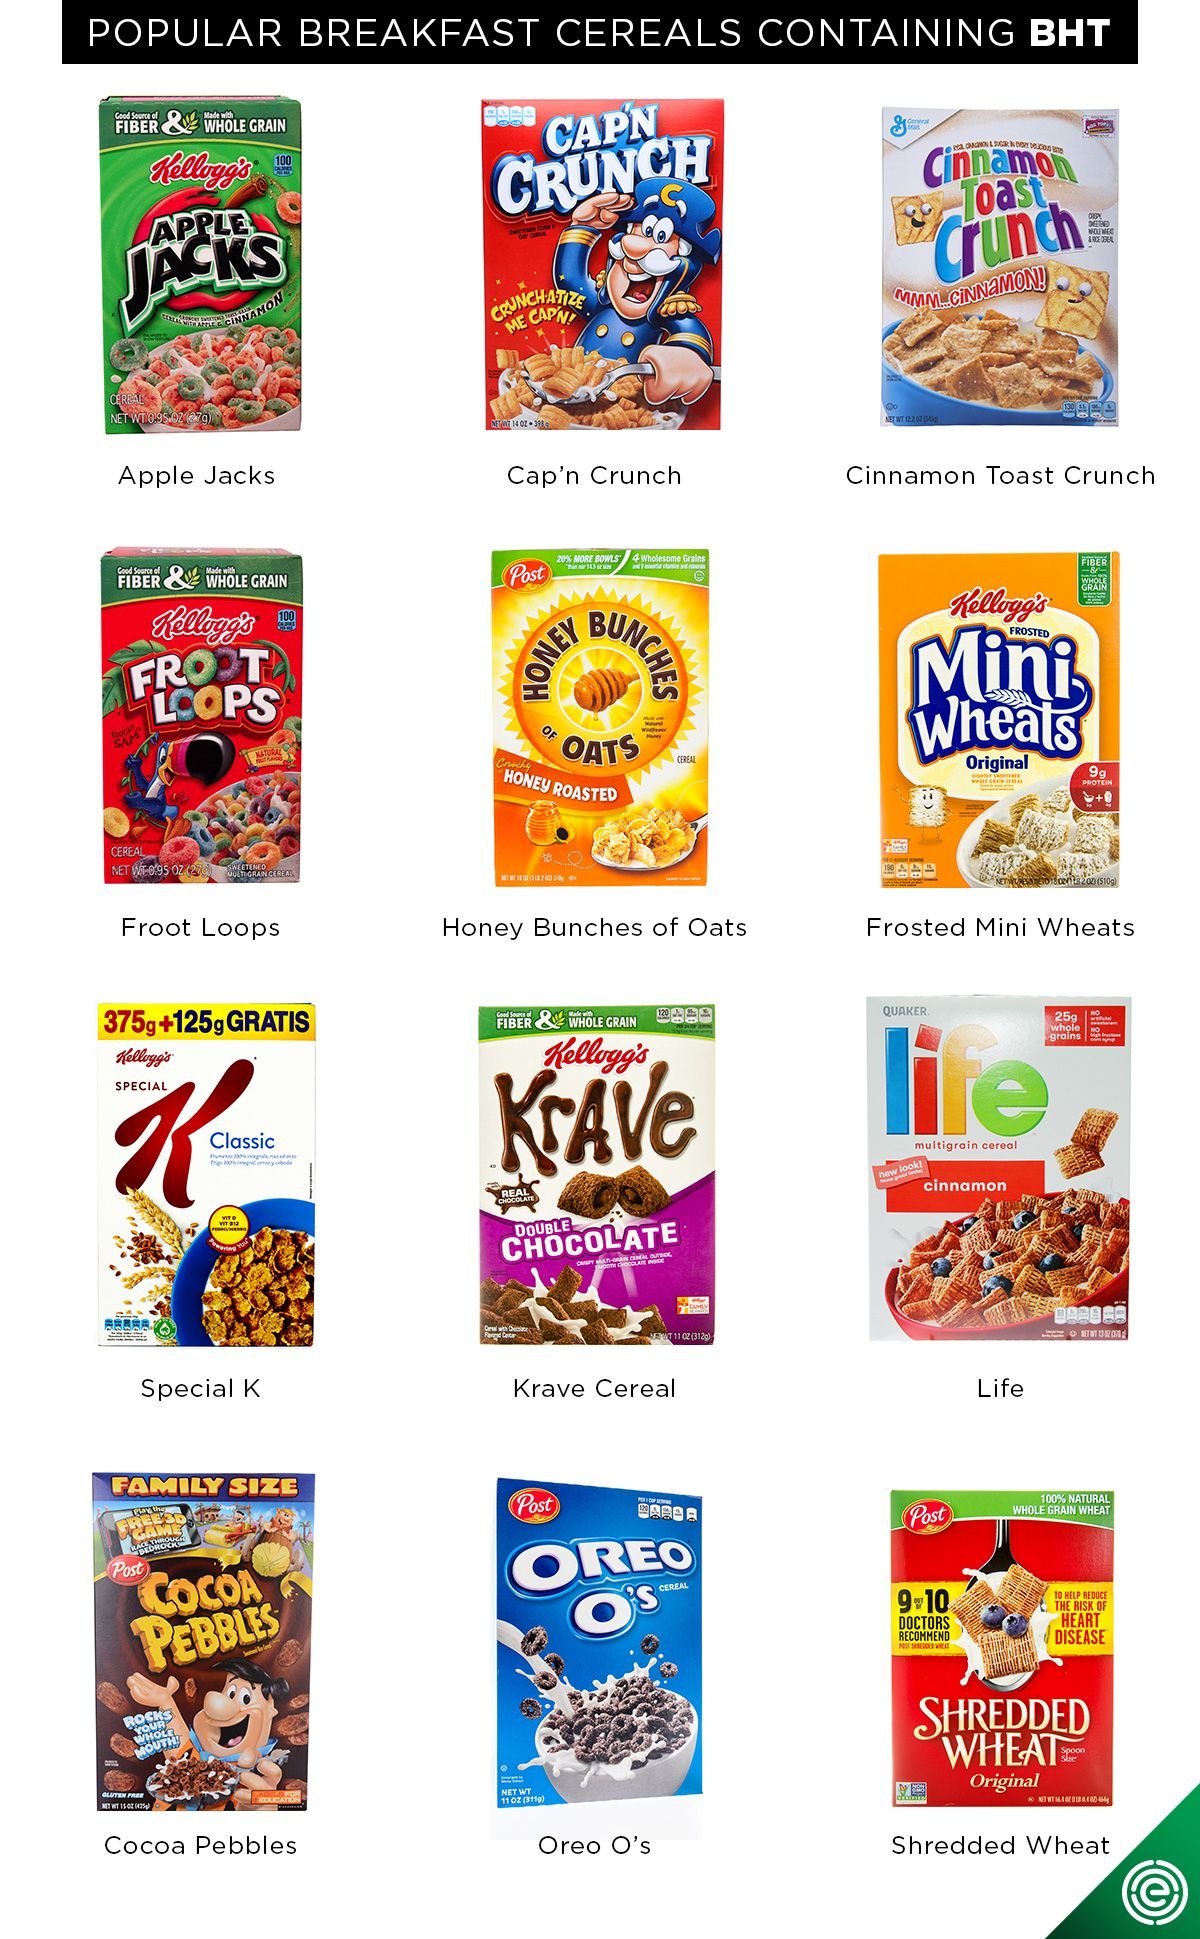 Boxes of cereal containing food additives